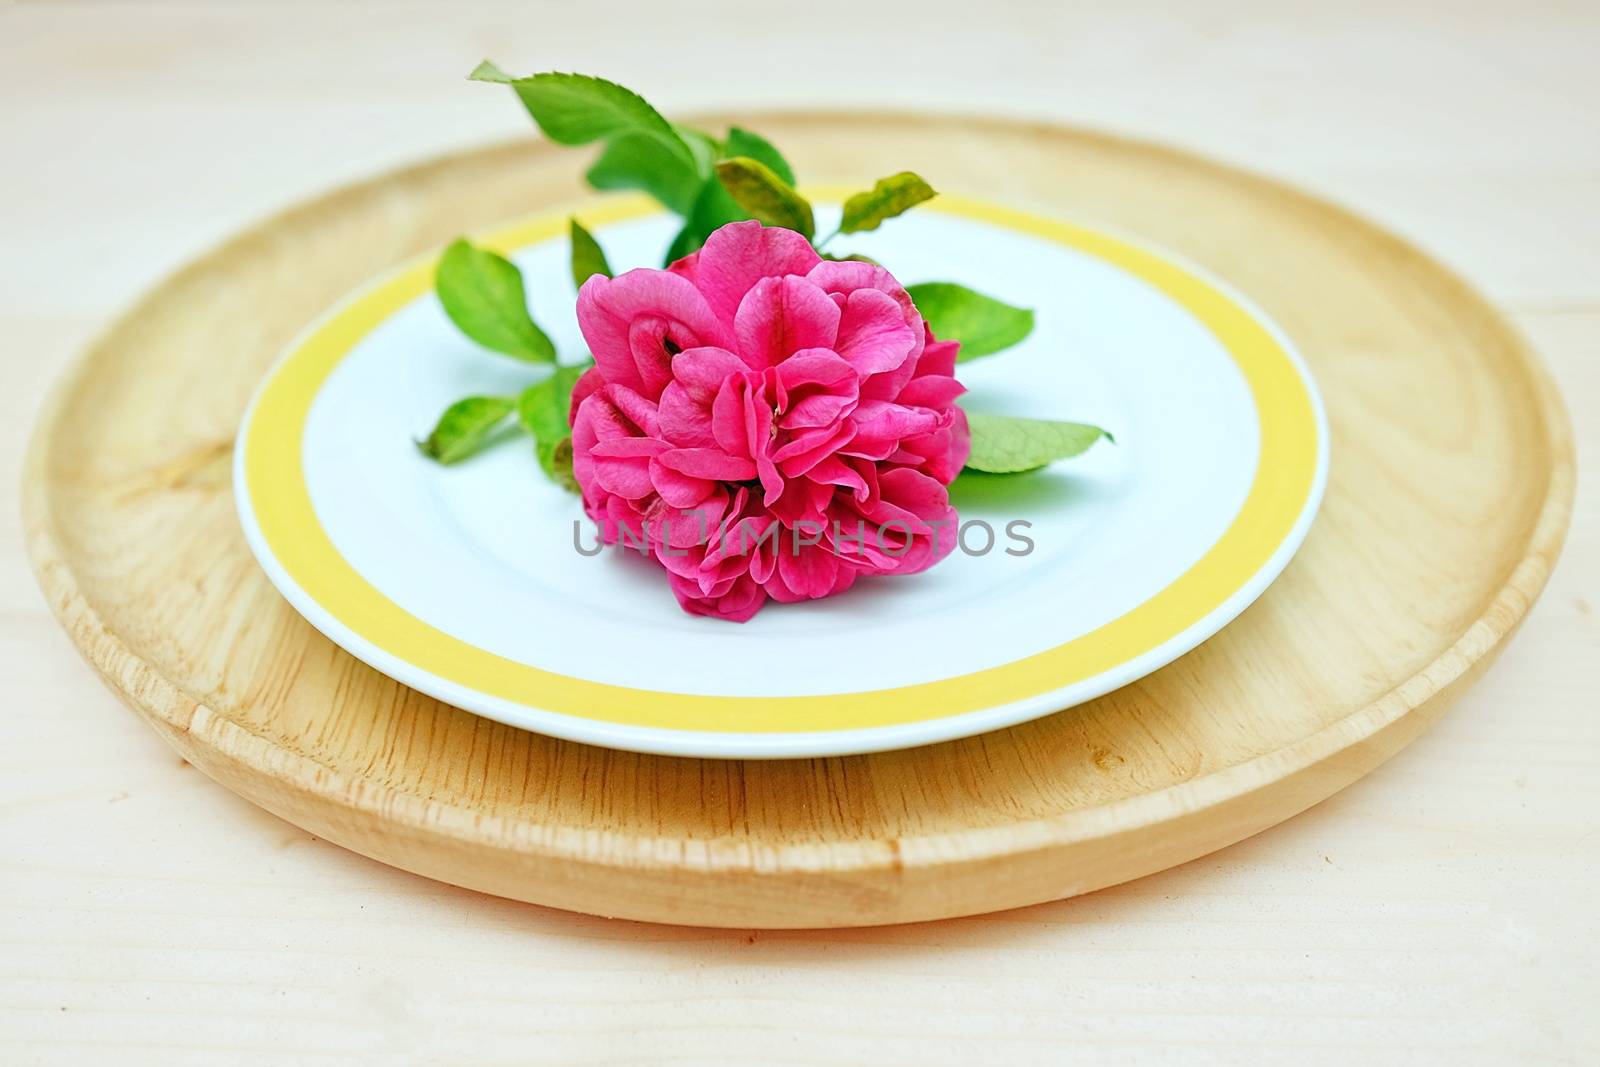 Chubby Pink Rose Flower on Double Dishes by aonip